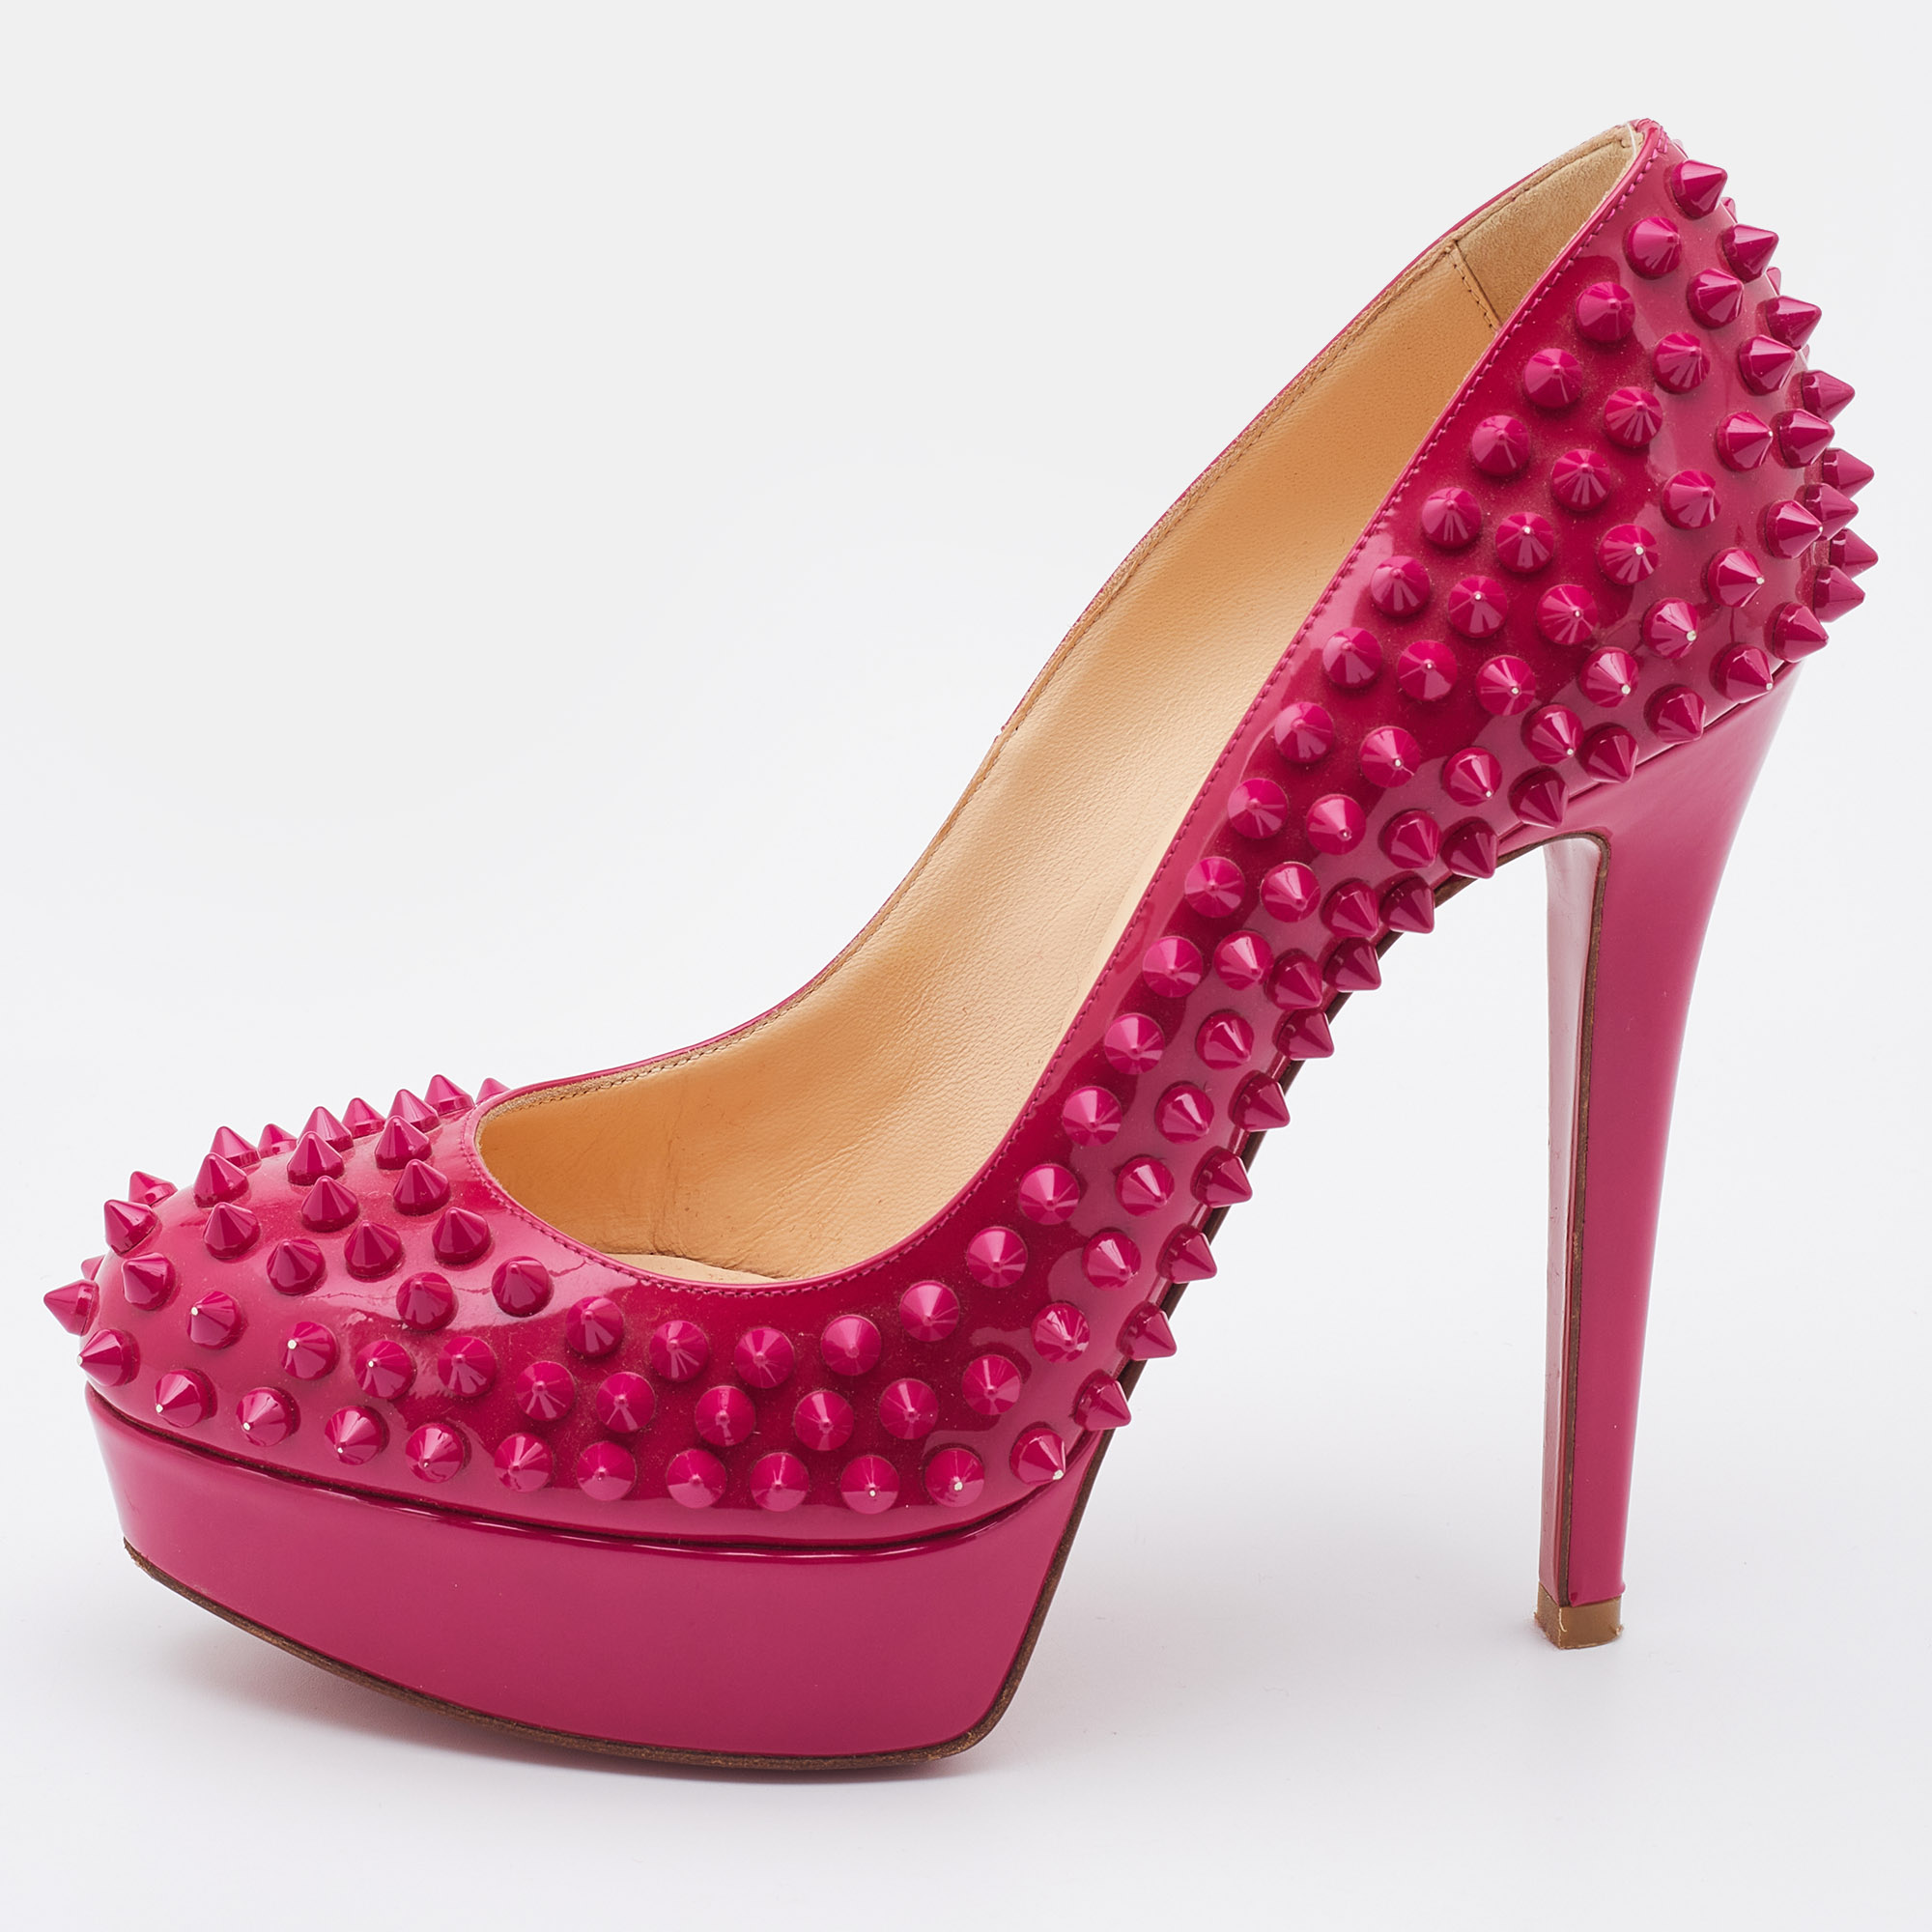 Pre-owned Christian Louboutin Pink Patent Leather Alti Spike Platform Pumps Size 36